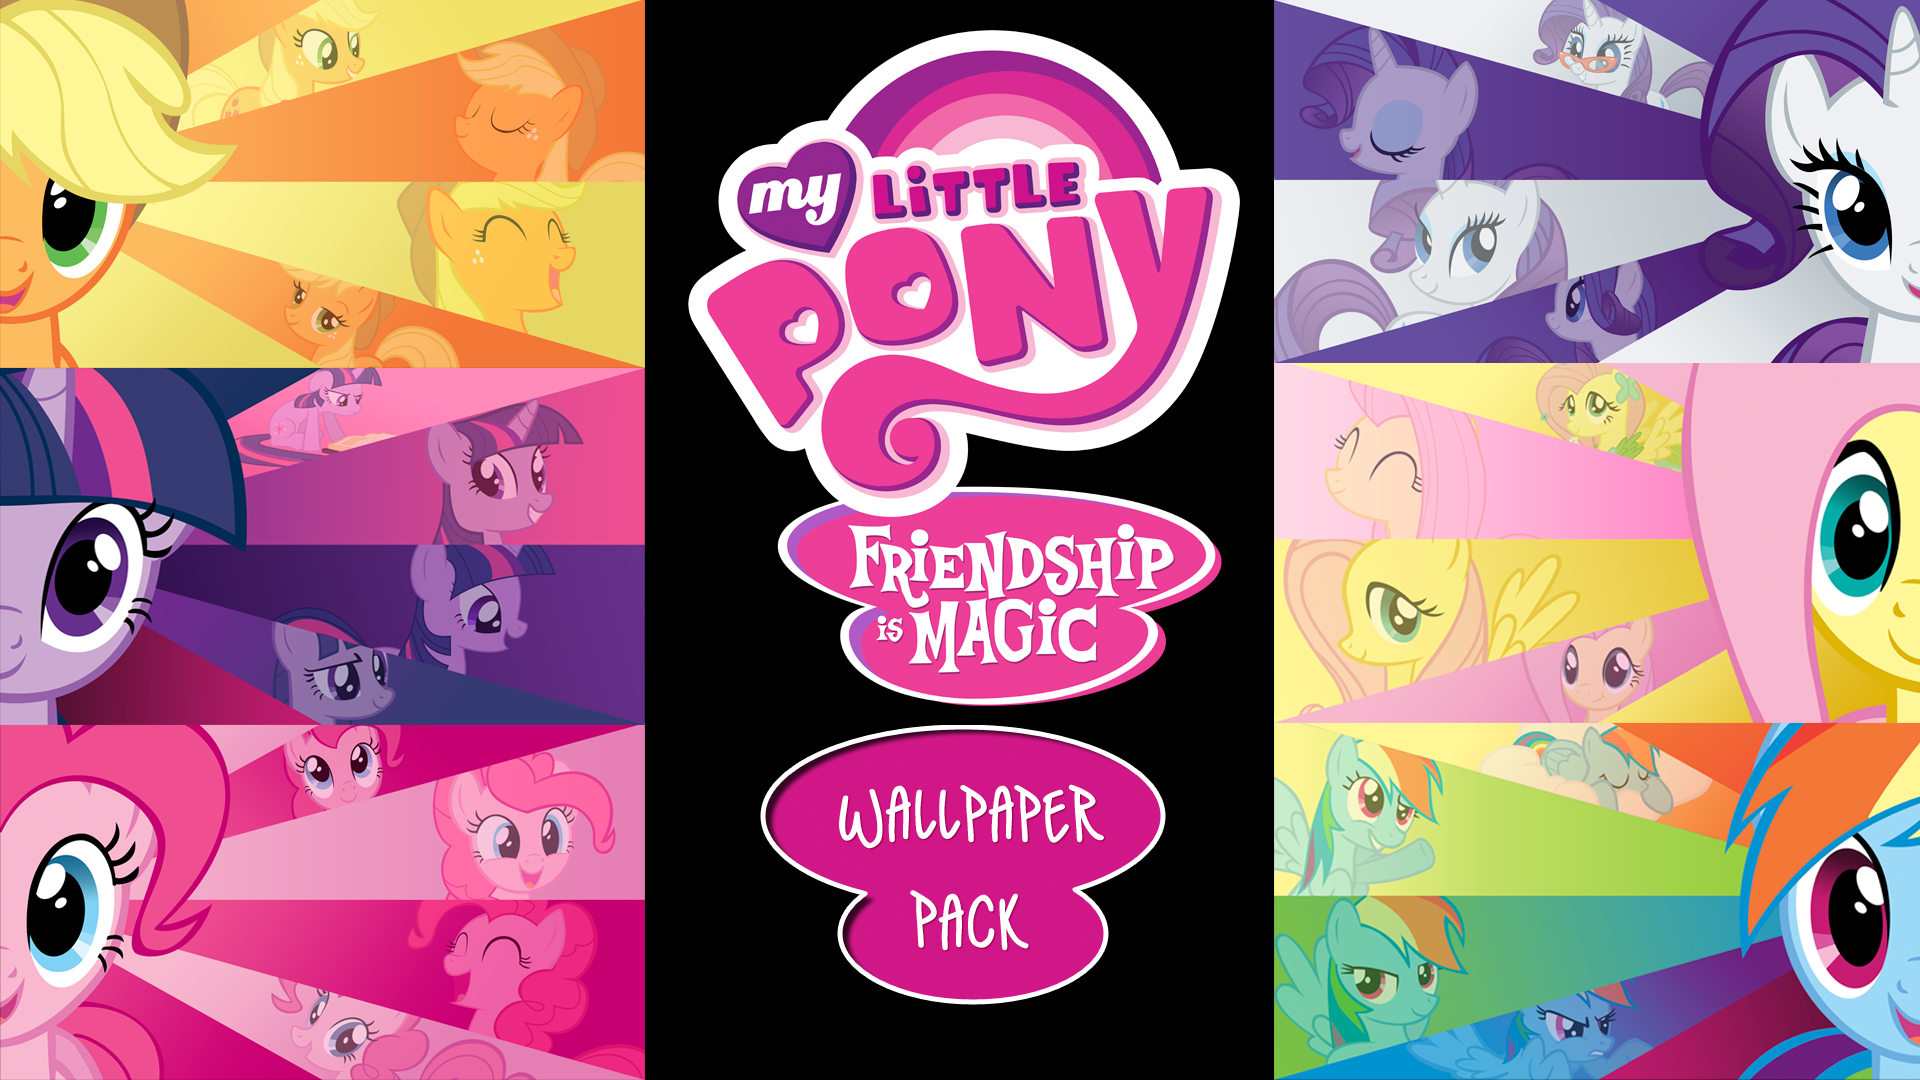 My Little Pony Friendship Is Magic Wallpaper Pack By BlueDragonHans 